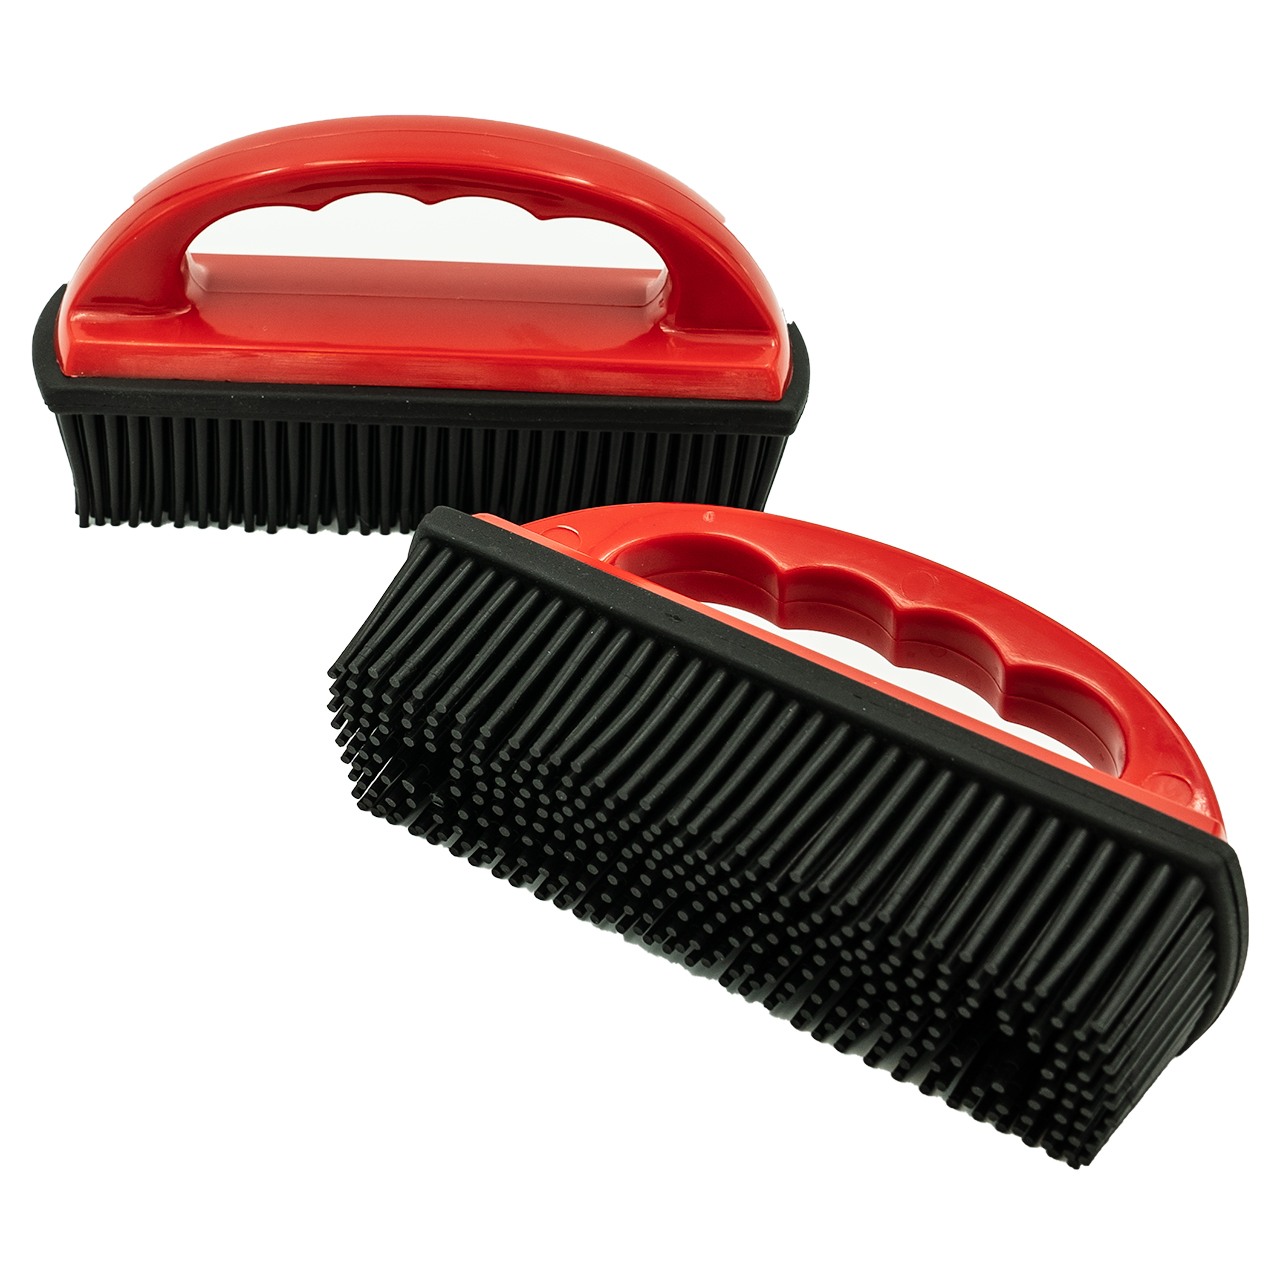 Pet/Dog hair remover brush with handle.